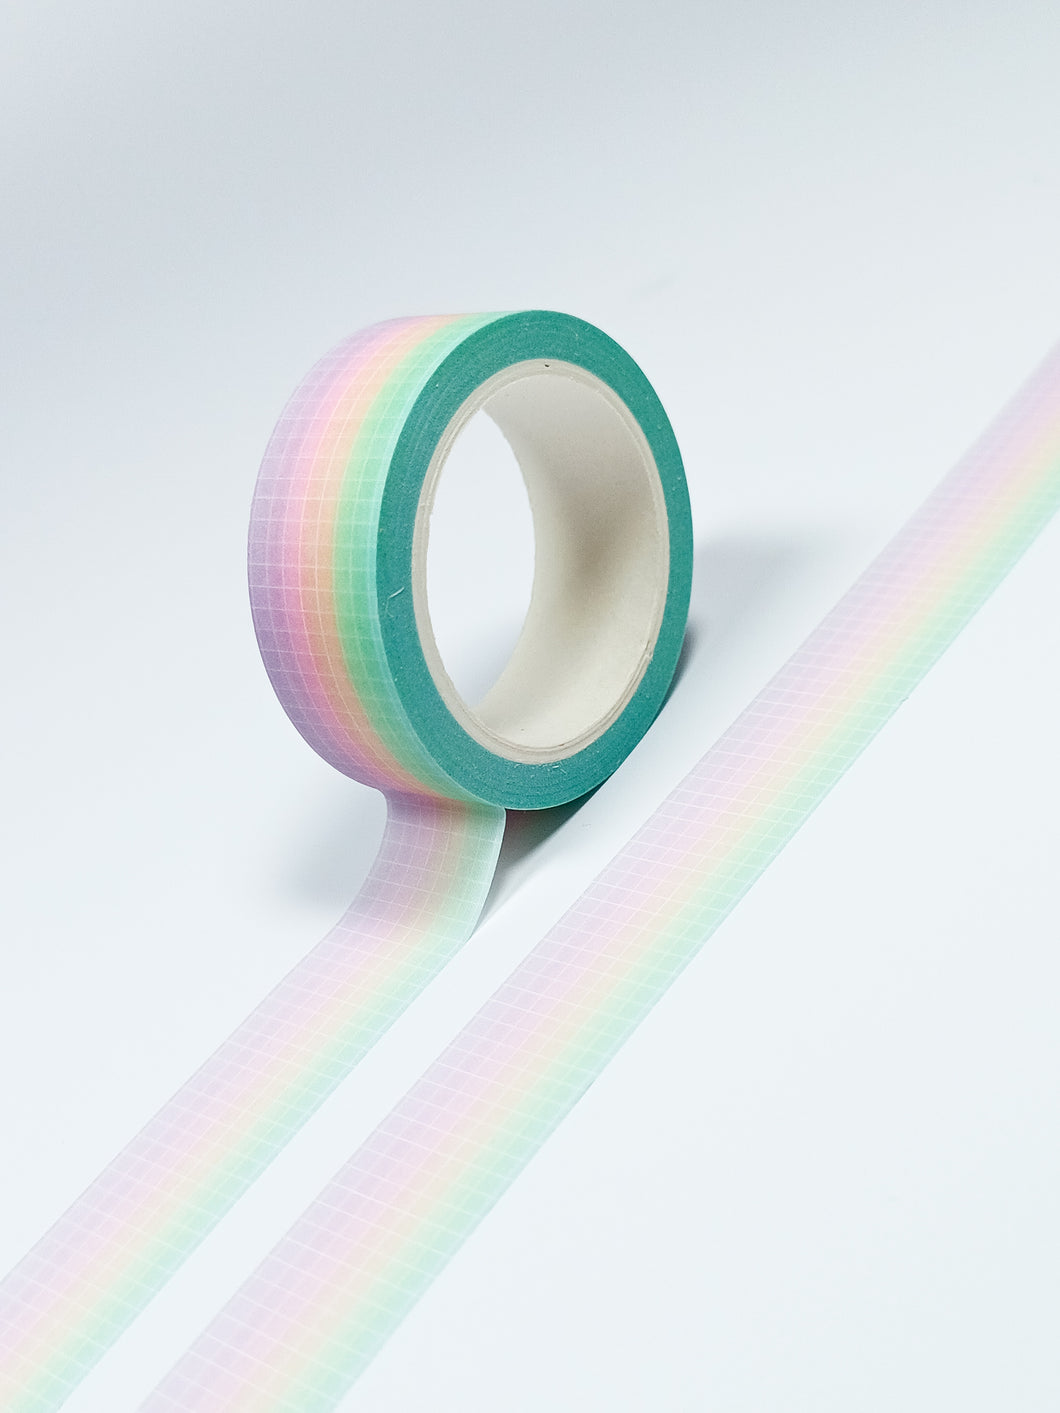 A Pastel Ombre Grid washi tape by GretelCreates on a white surface.